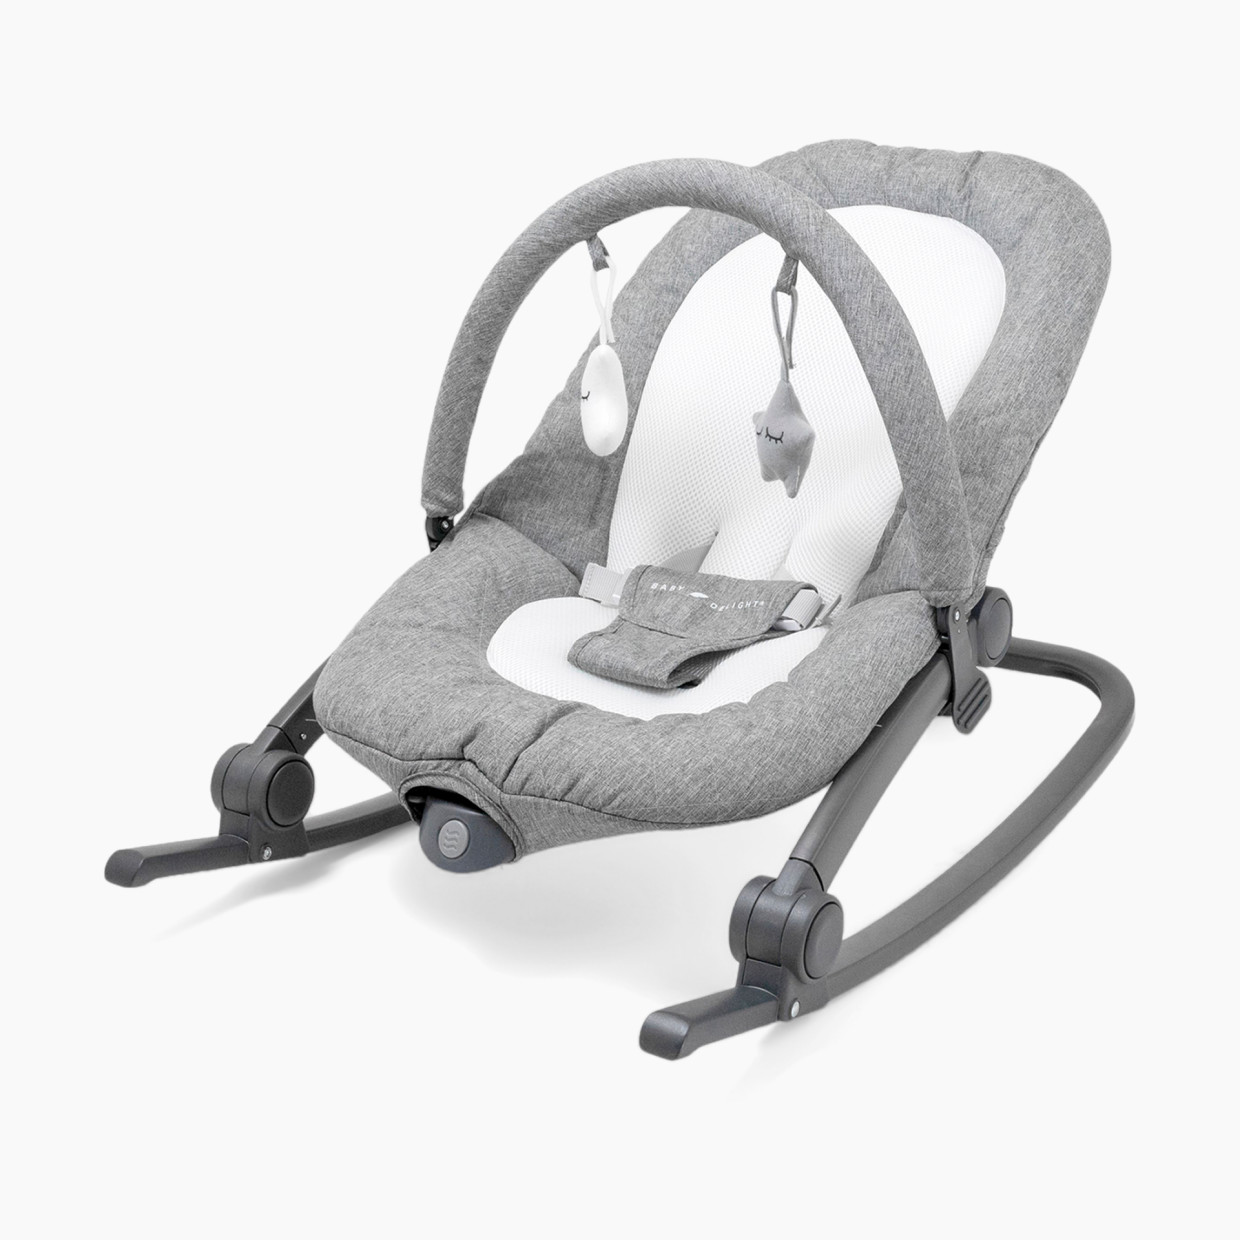 Baby Delight Aura Deluxe Portable Rocker & Bouncer - Quilted Charcoal Tweed.